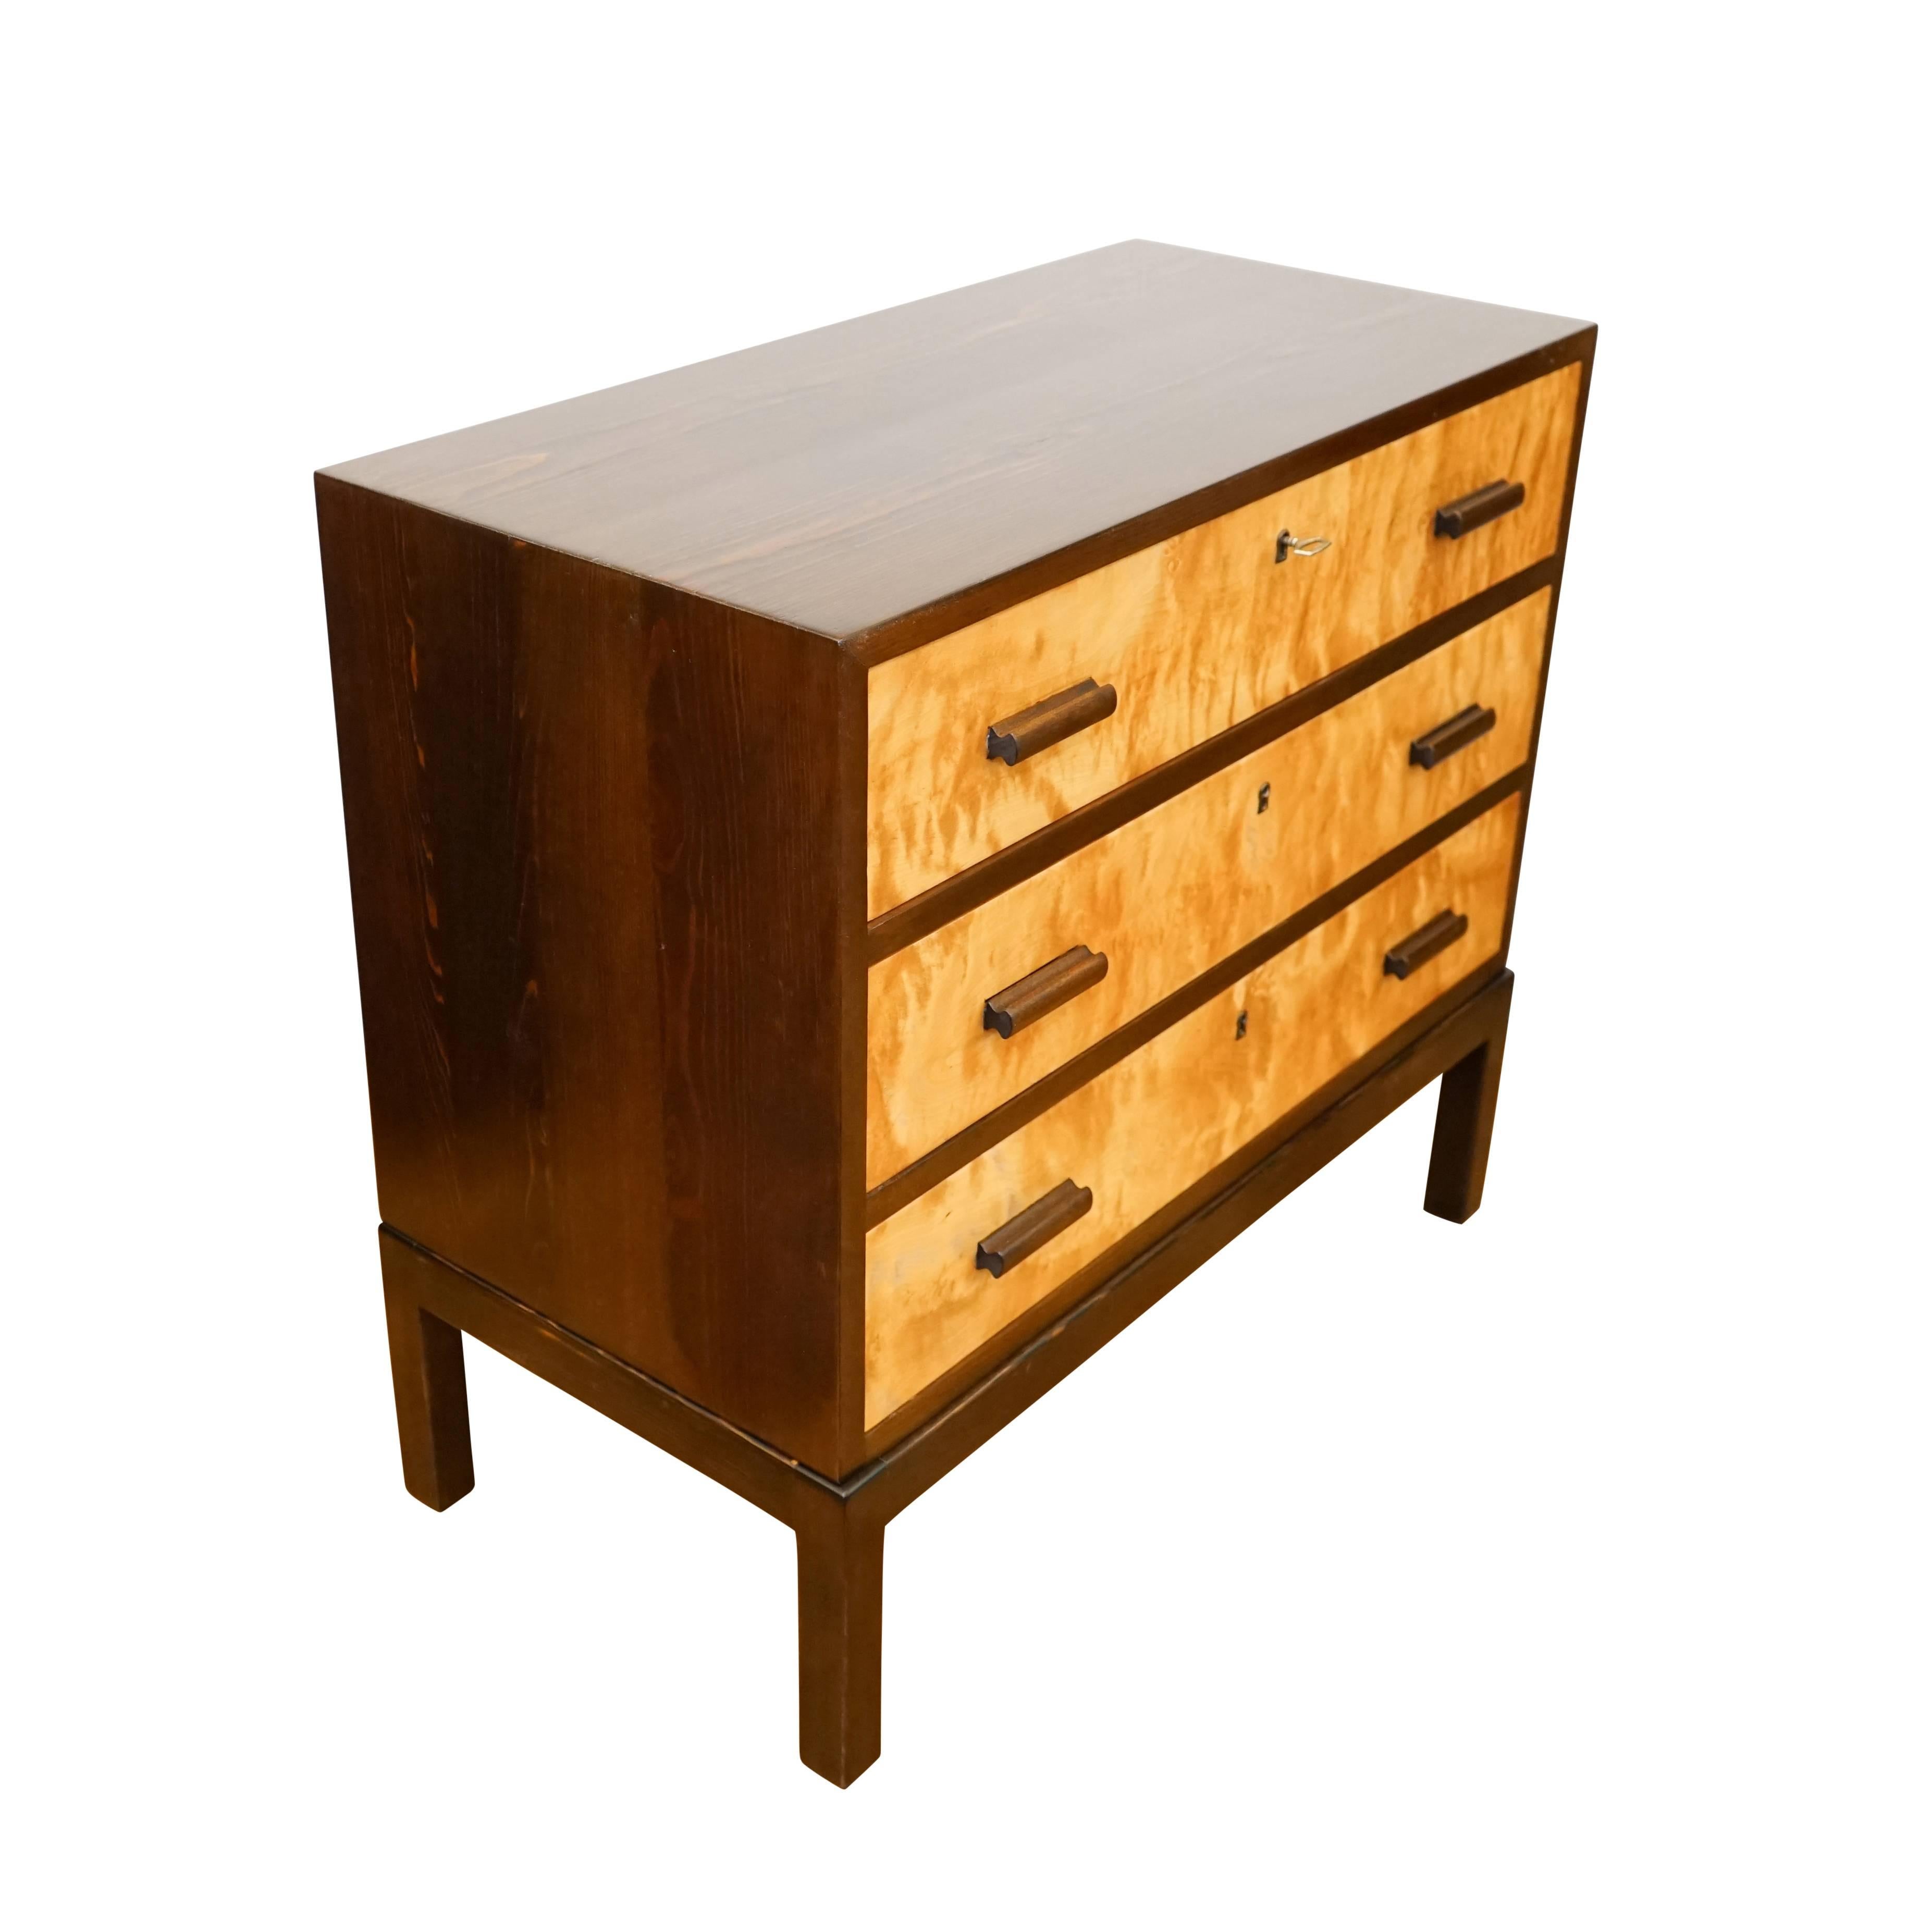 This Minimalist chest of drawers combines elegance with simplicity. Crafted of solid fir and birch veneers and stained golden birch and walnut tones, the locking three-drawer chest is useful in interiors featuring various types and tones of wood.